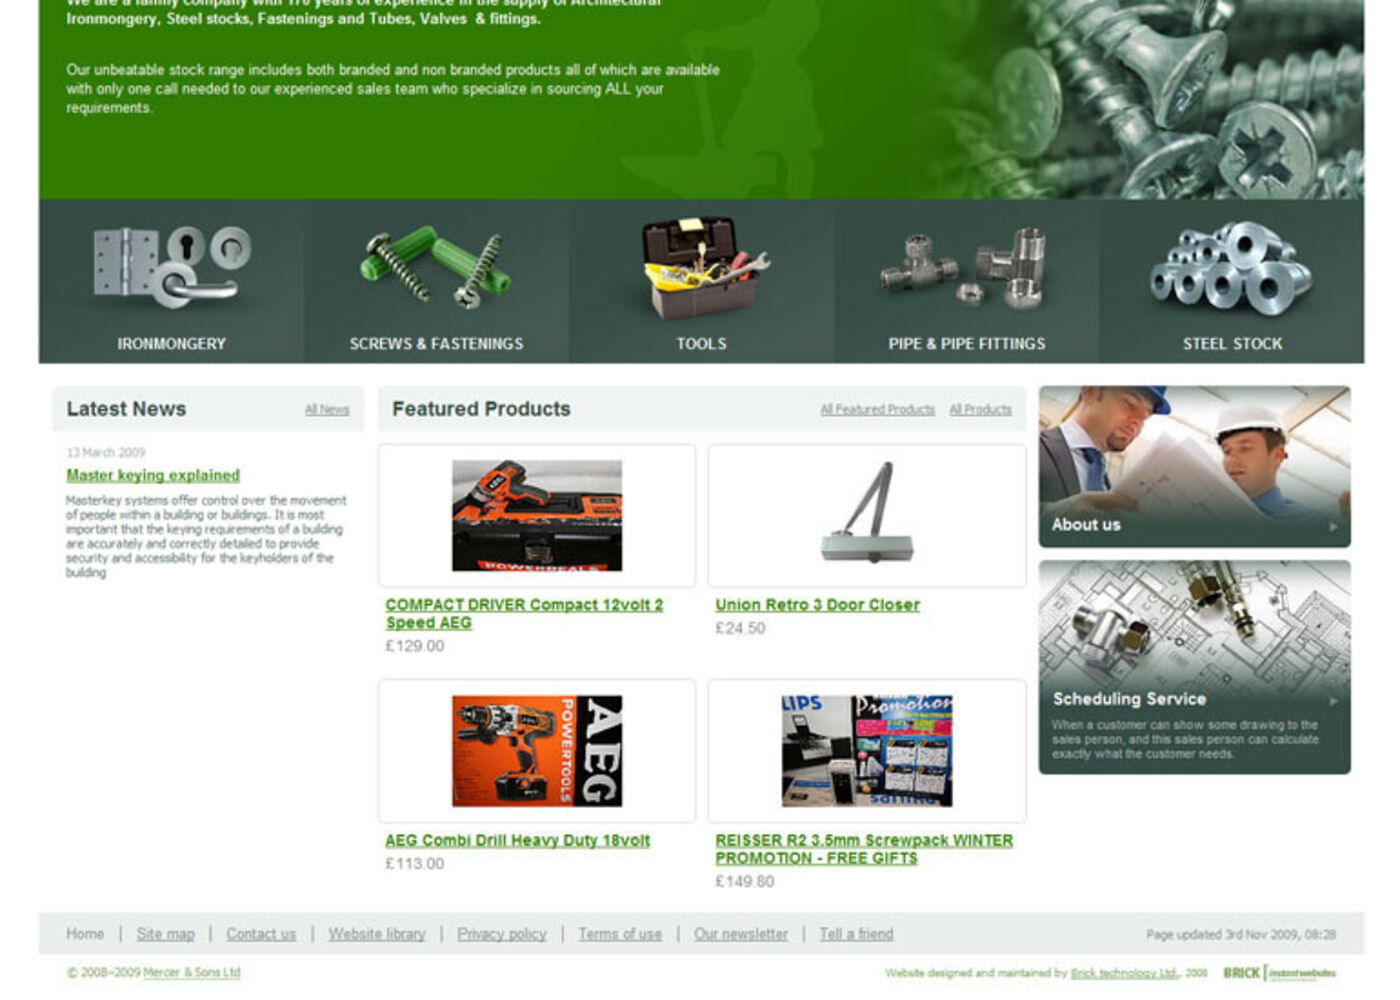 Mercers and Sons (2009) Homepage footer - Mercer & Sons